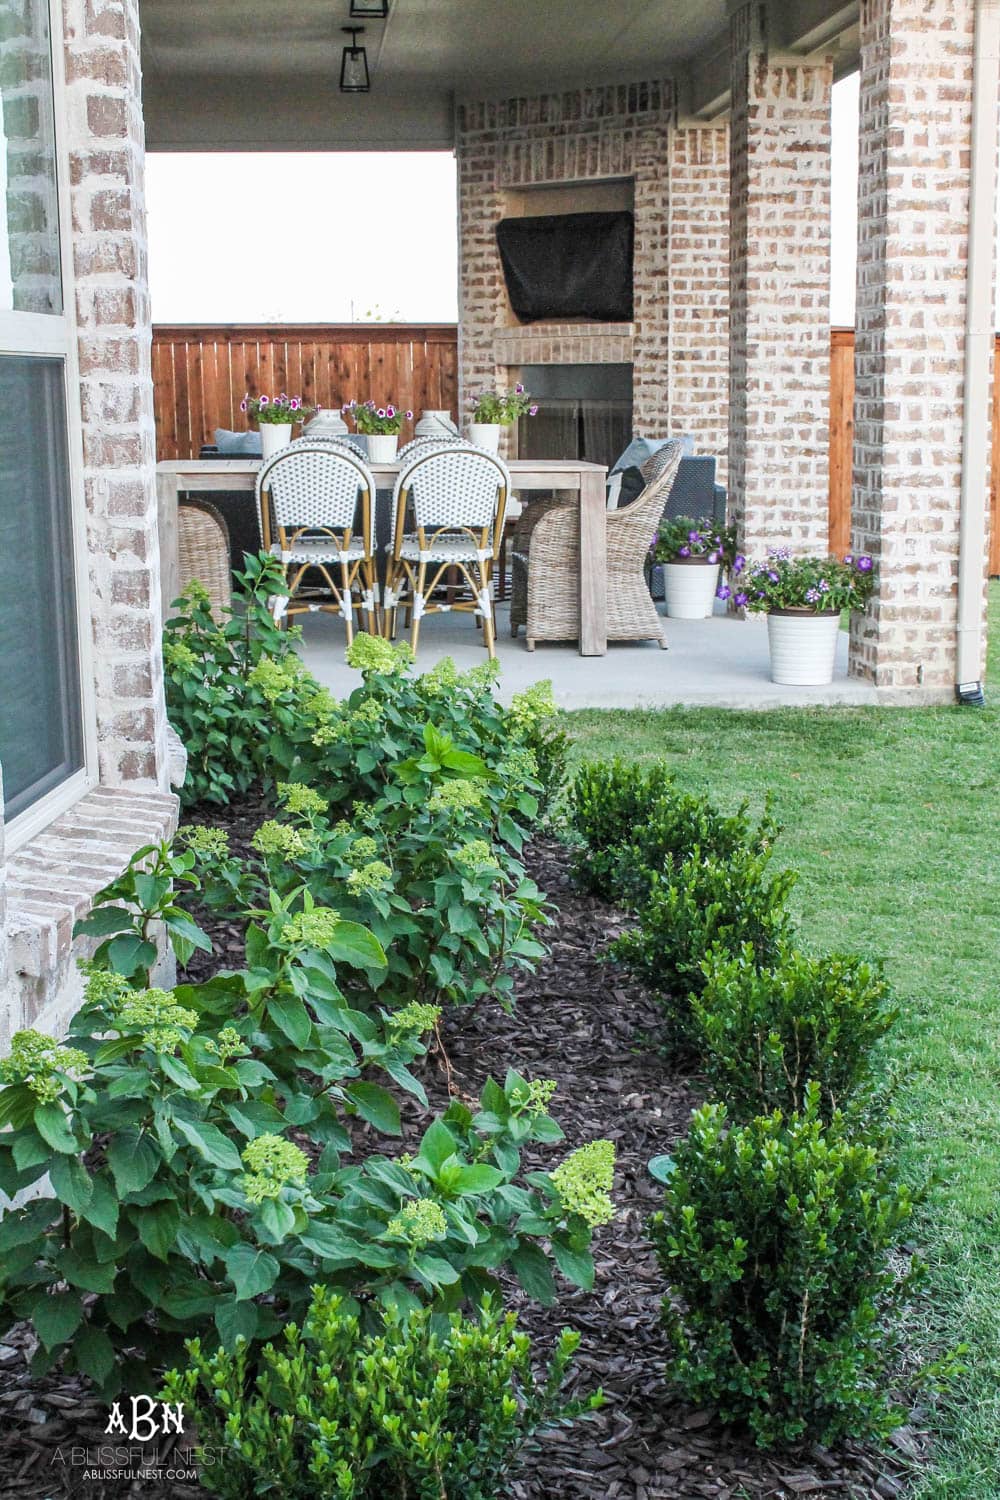 A small backyard makeover before and after with ideas on small backyard landscaping ideas. #ad #husqvarna #backyardideas #brickhouse #landscaping